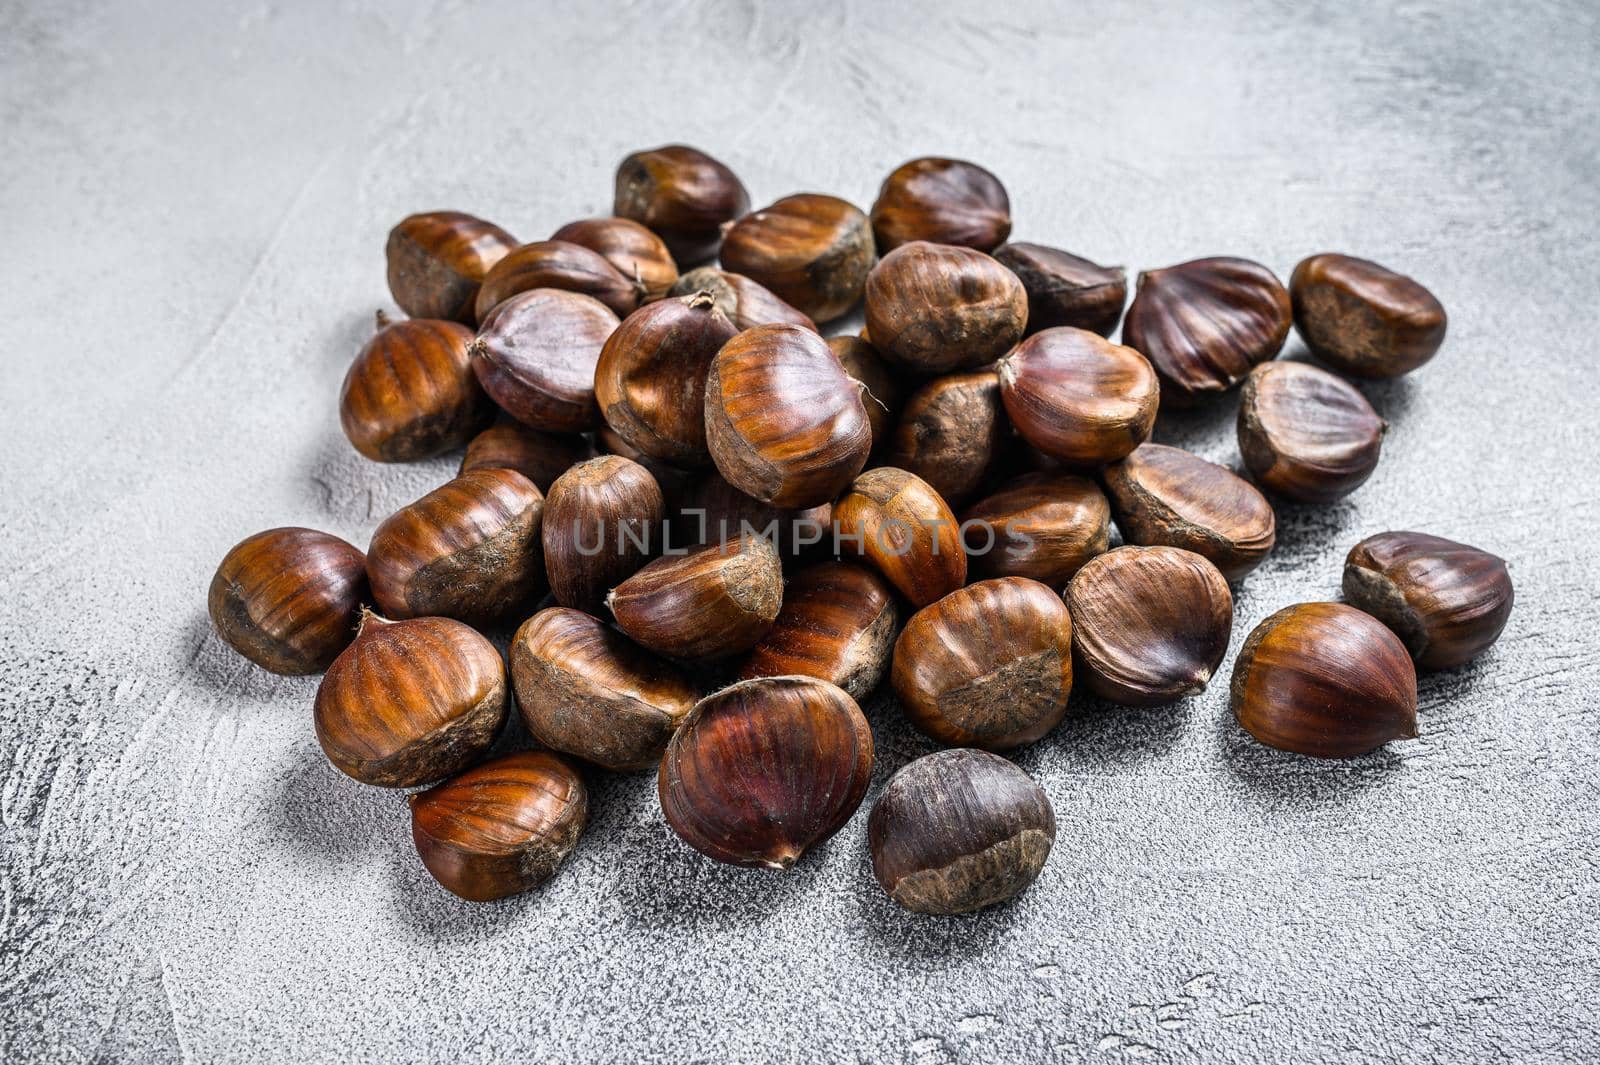 Raw chestnuts on a wooden table. White background. Top view by Composter